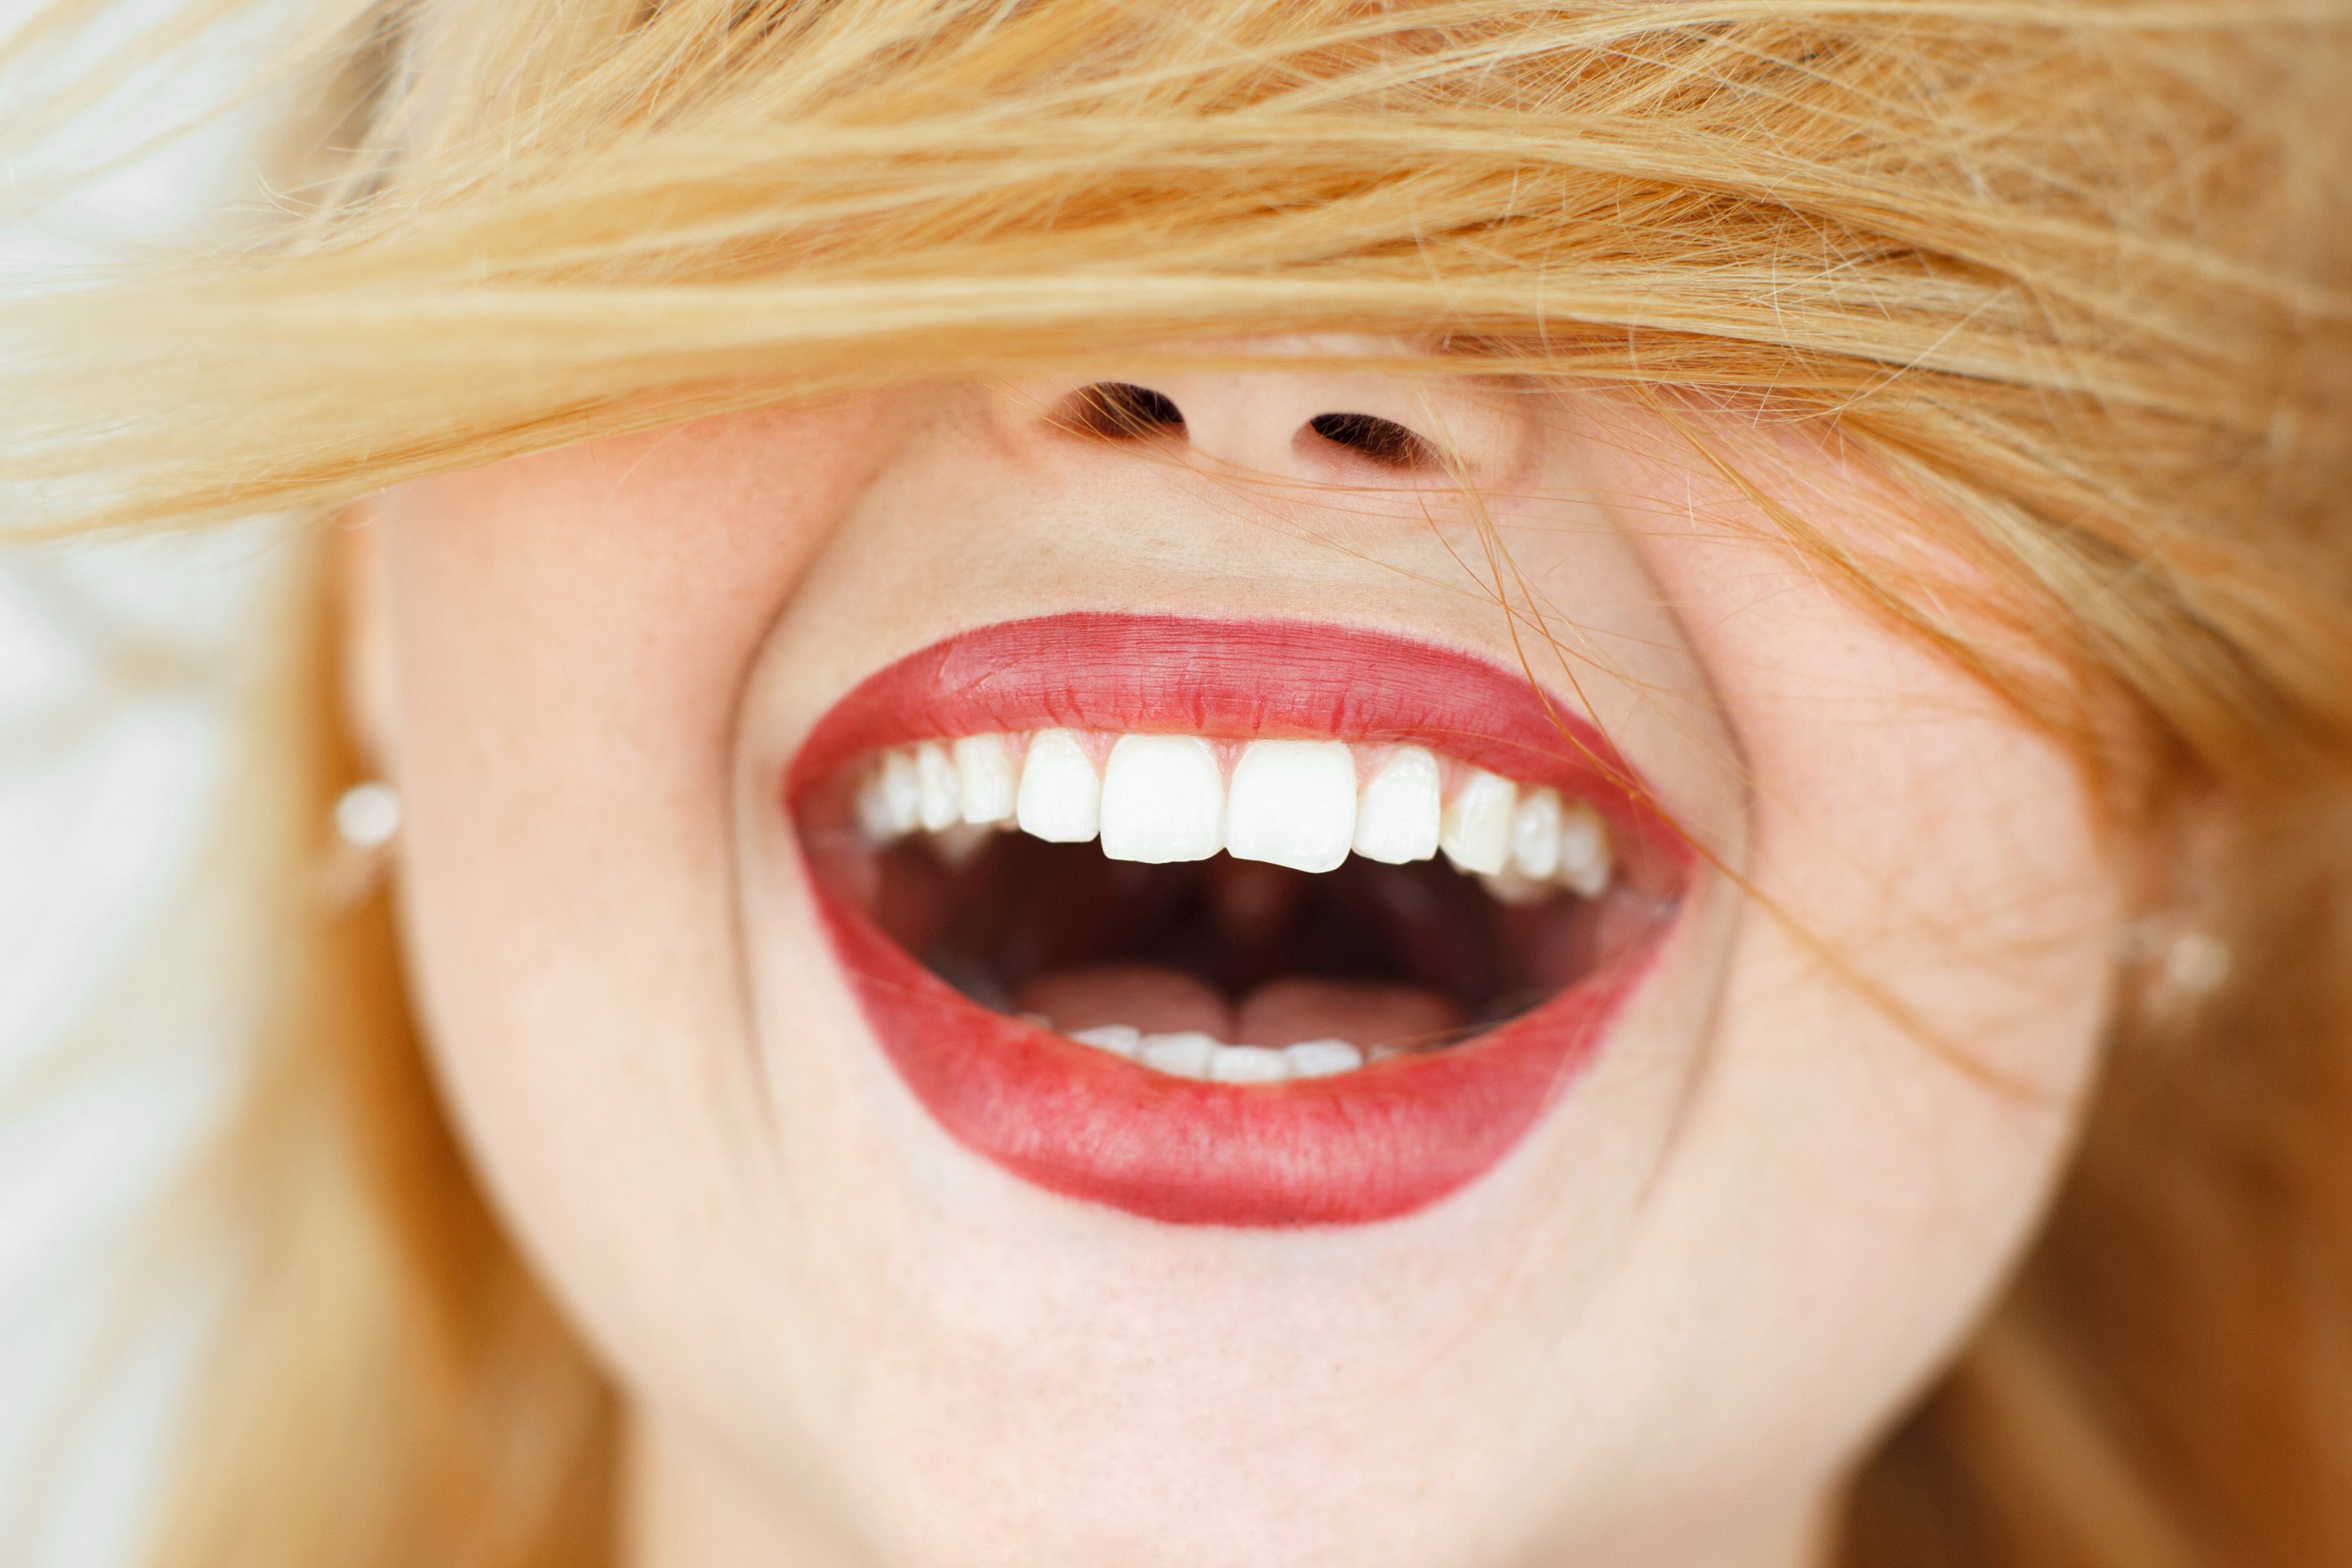 Happy laughing woman with red hair close-up